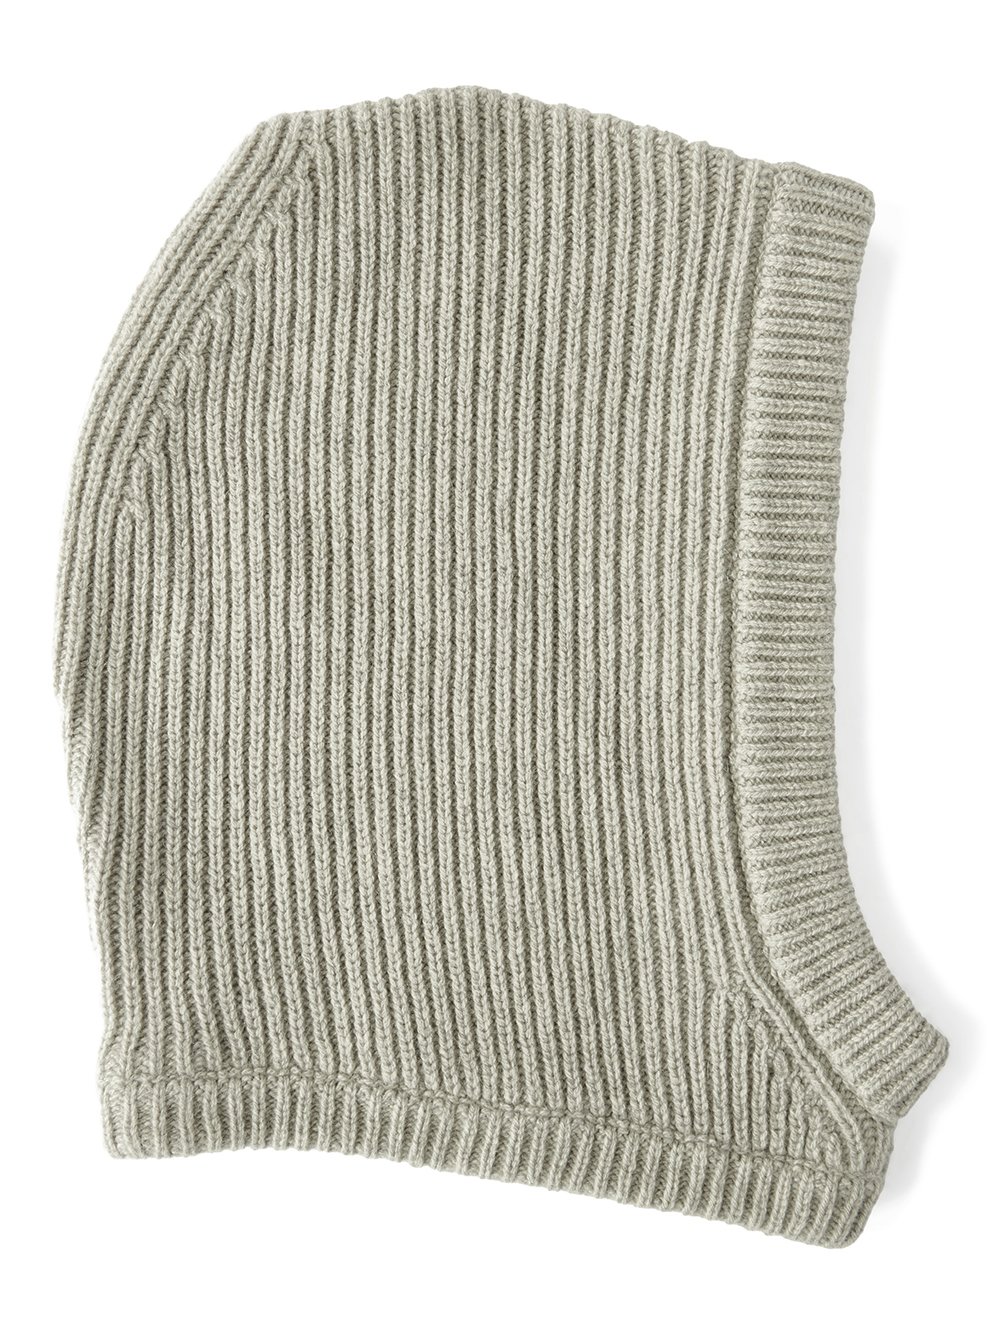 RICK OWENS FW23 LUXOR HOOD IN PEARL RECYCLED CASHMERE KNIT